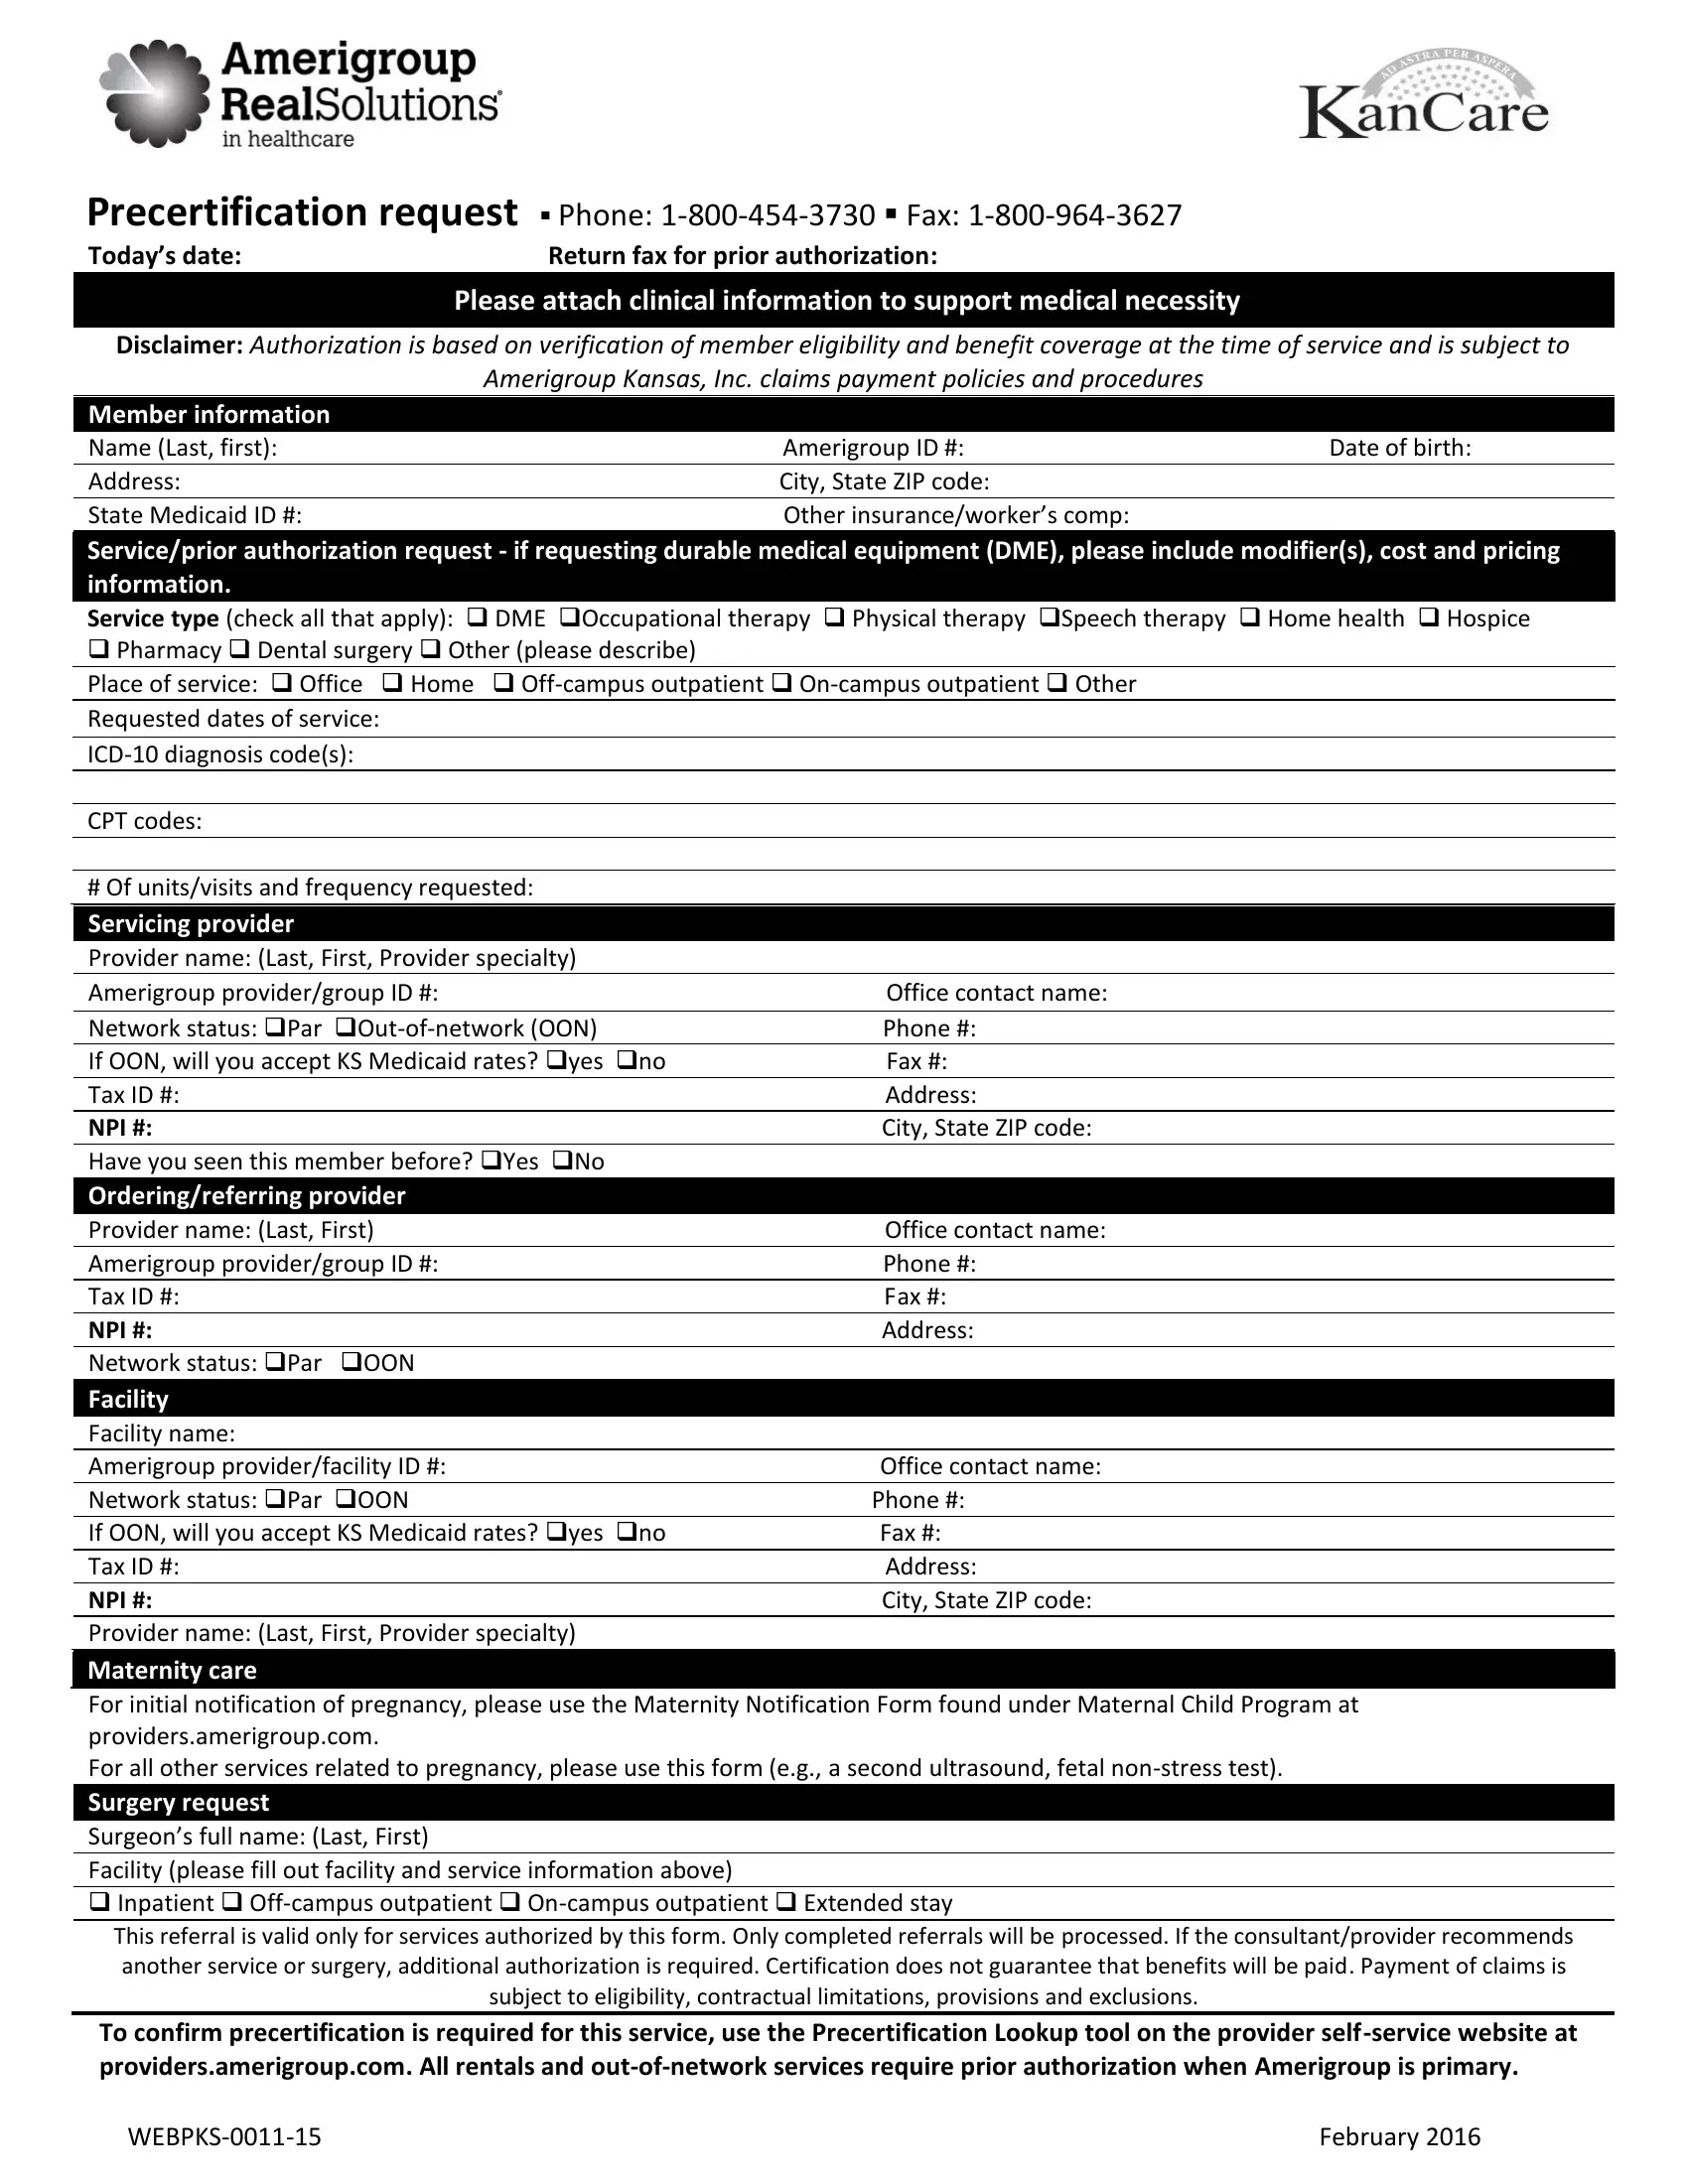 Prior authorization form for amerigroup conduent layoffs jan 2018